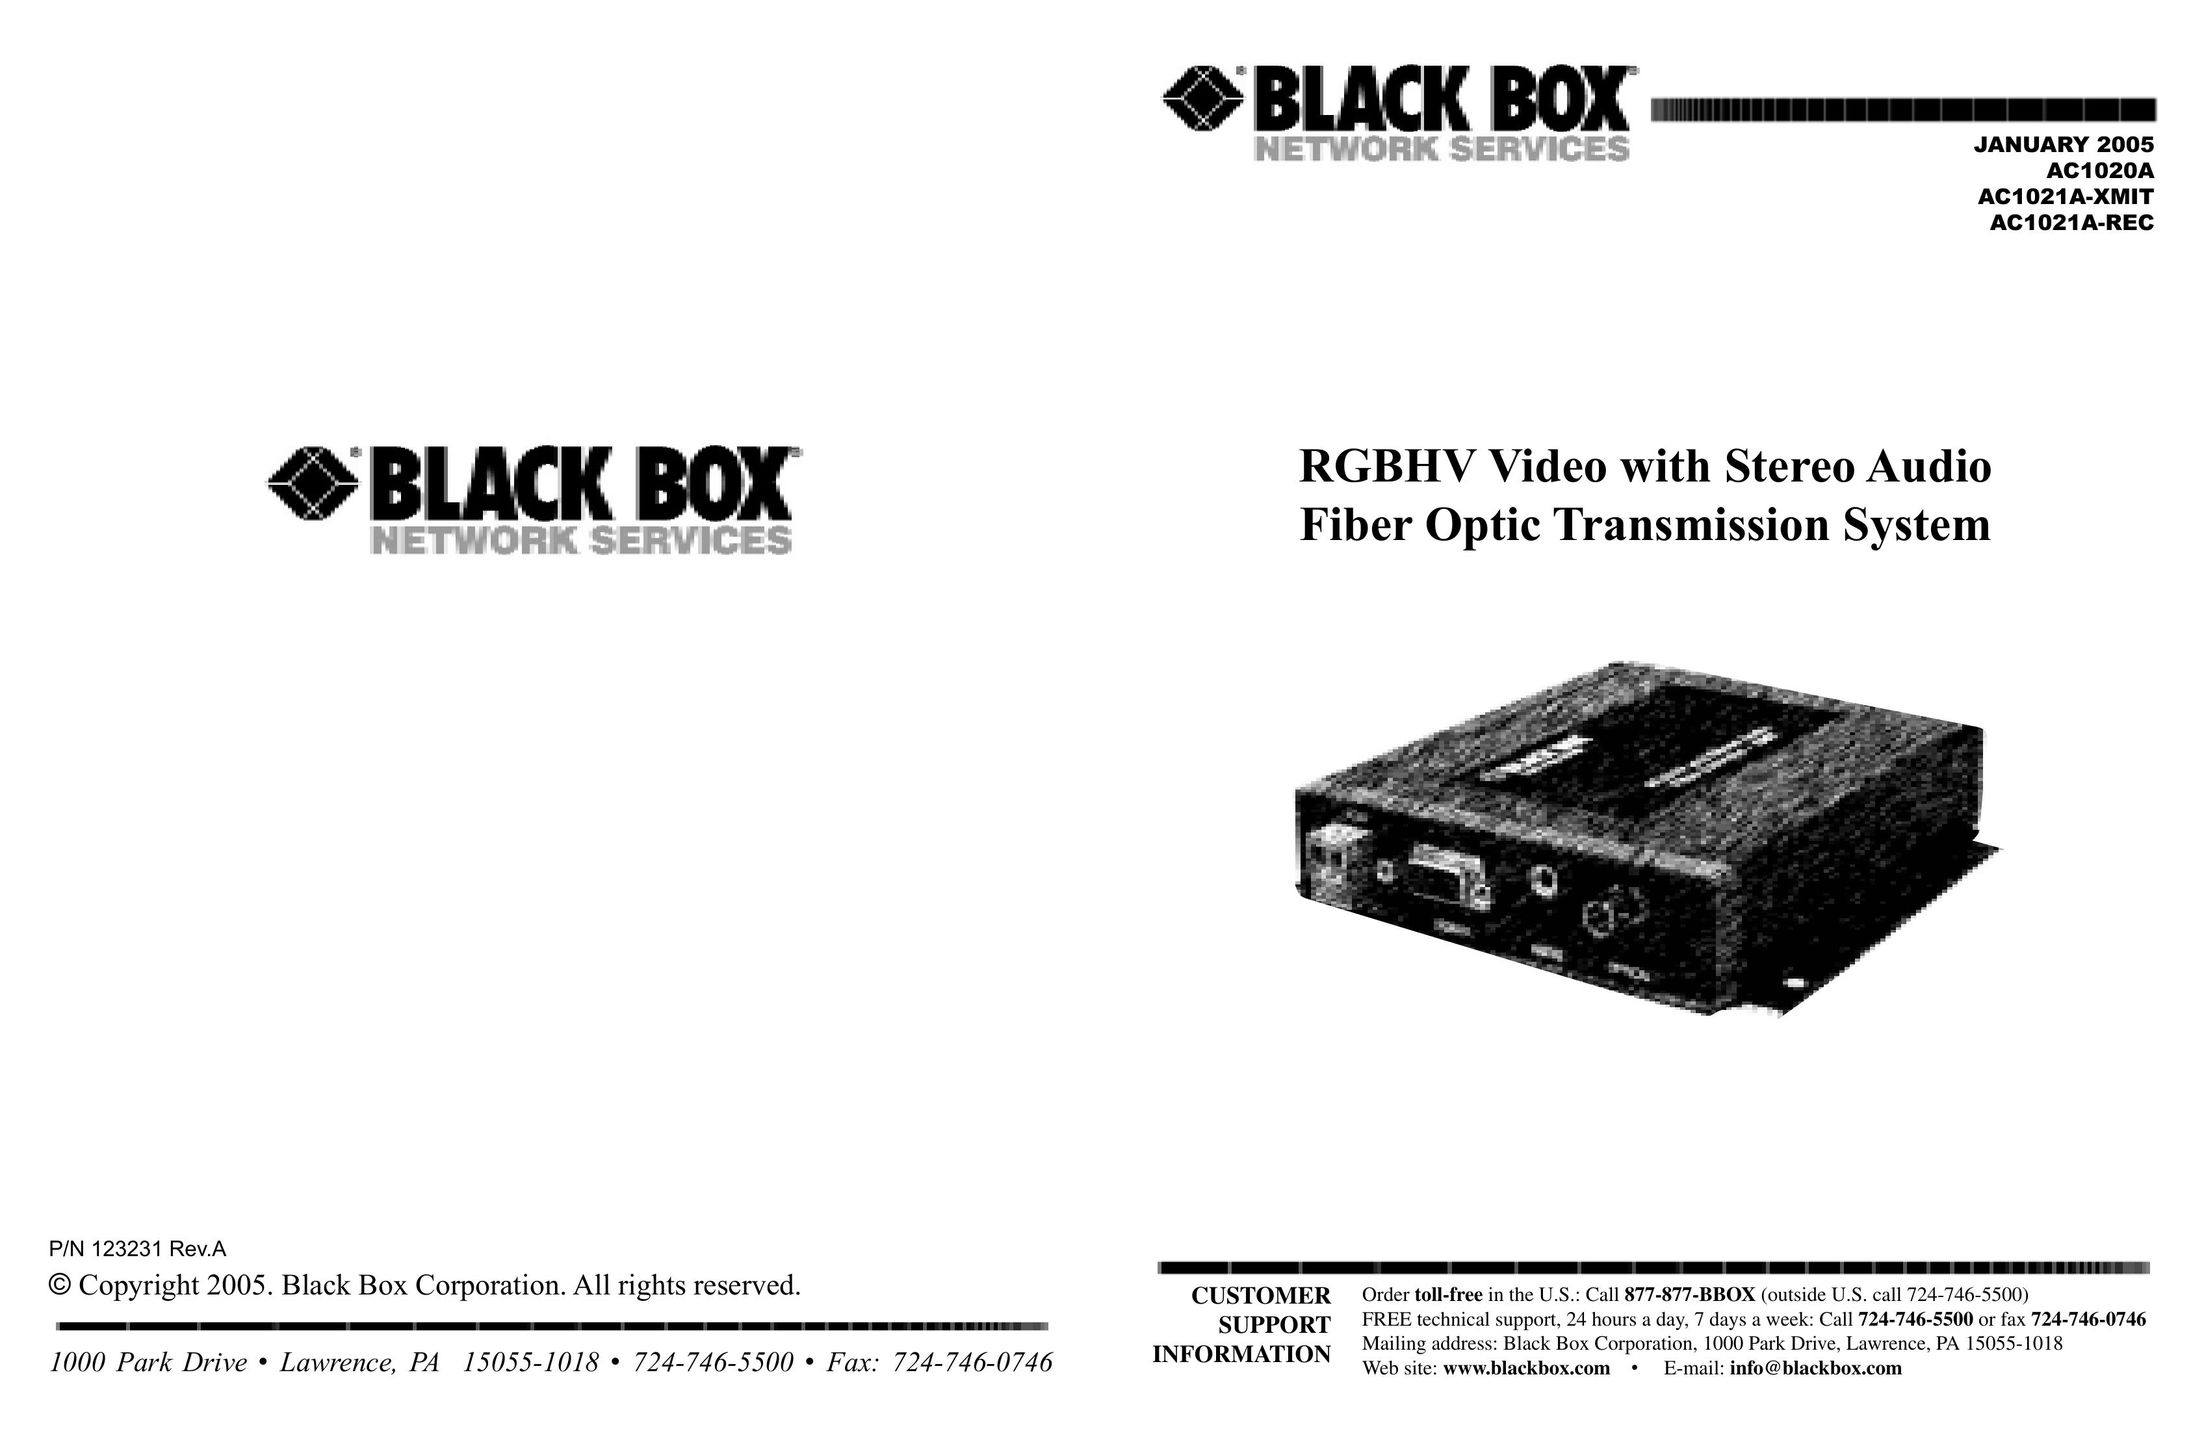 Black Box RGBHV Video with Stereo Audio Fiber Optic Transmission System Printer Accessories User Manual